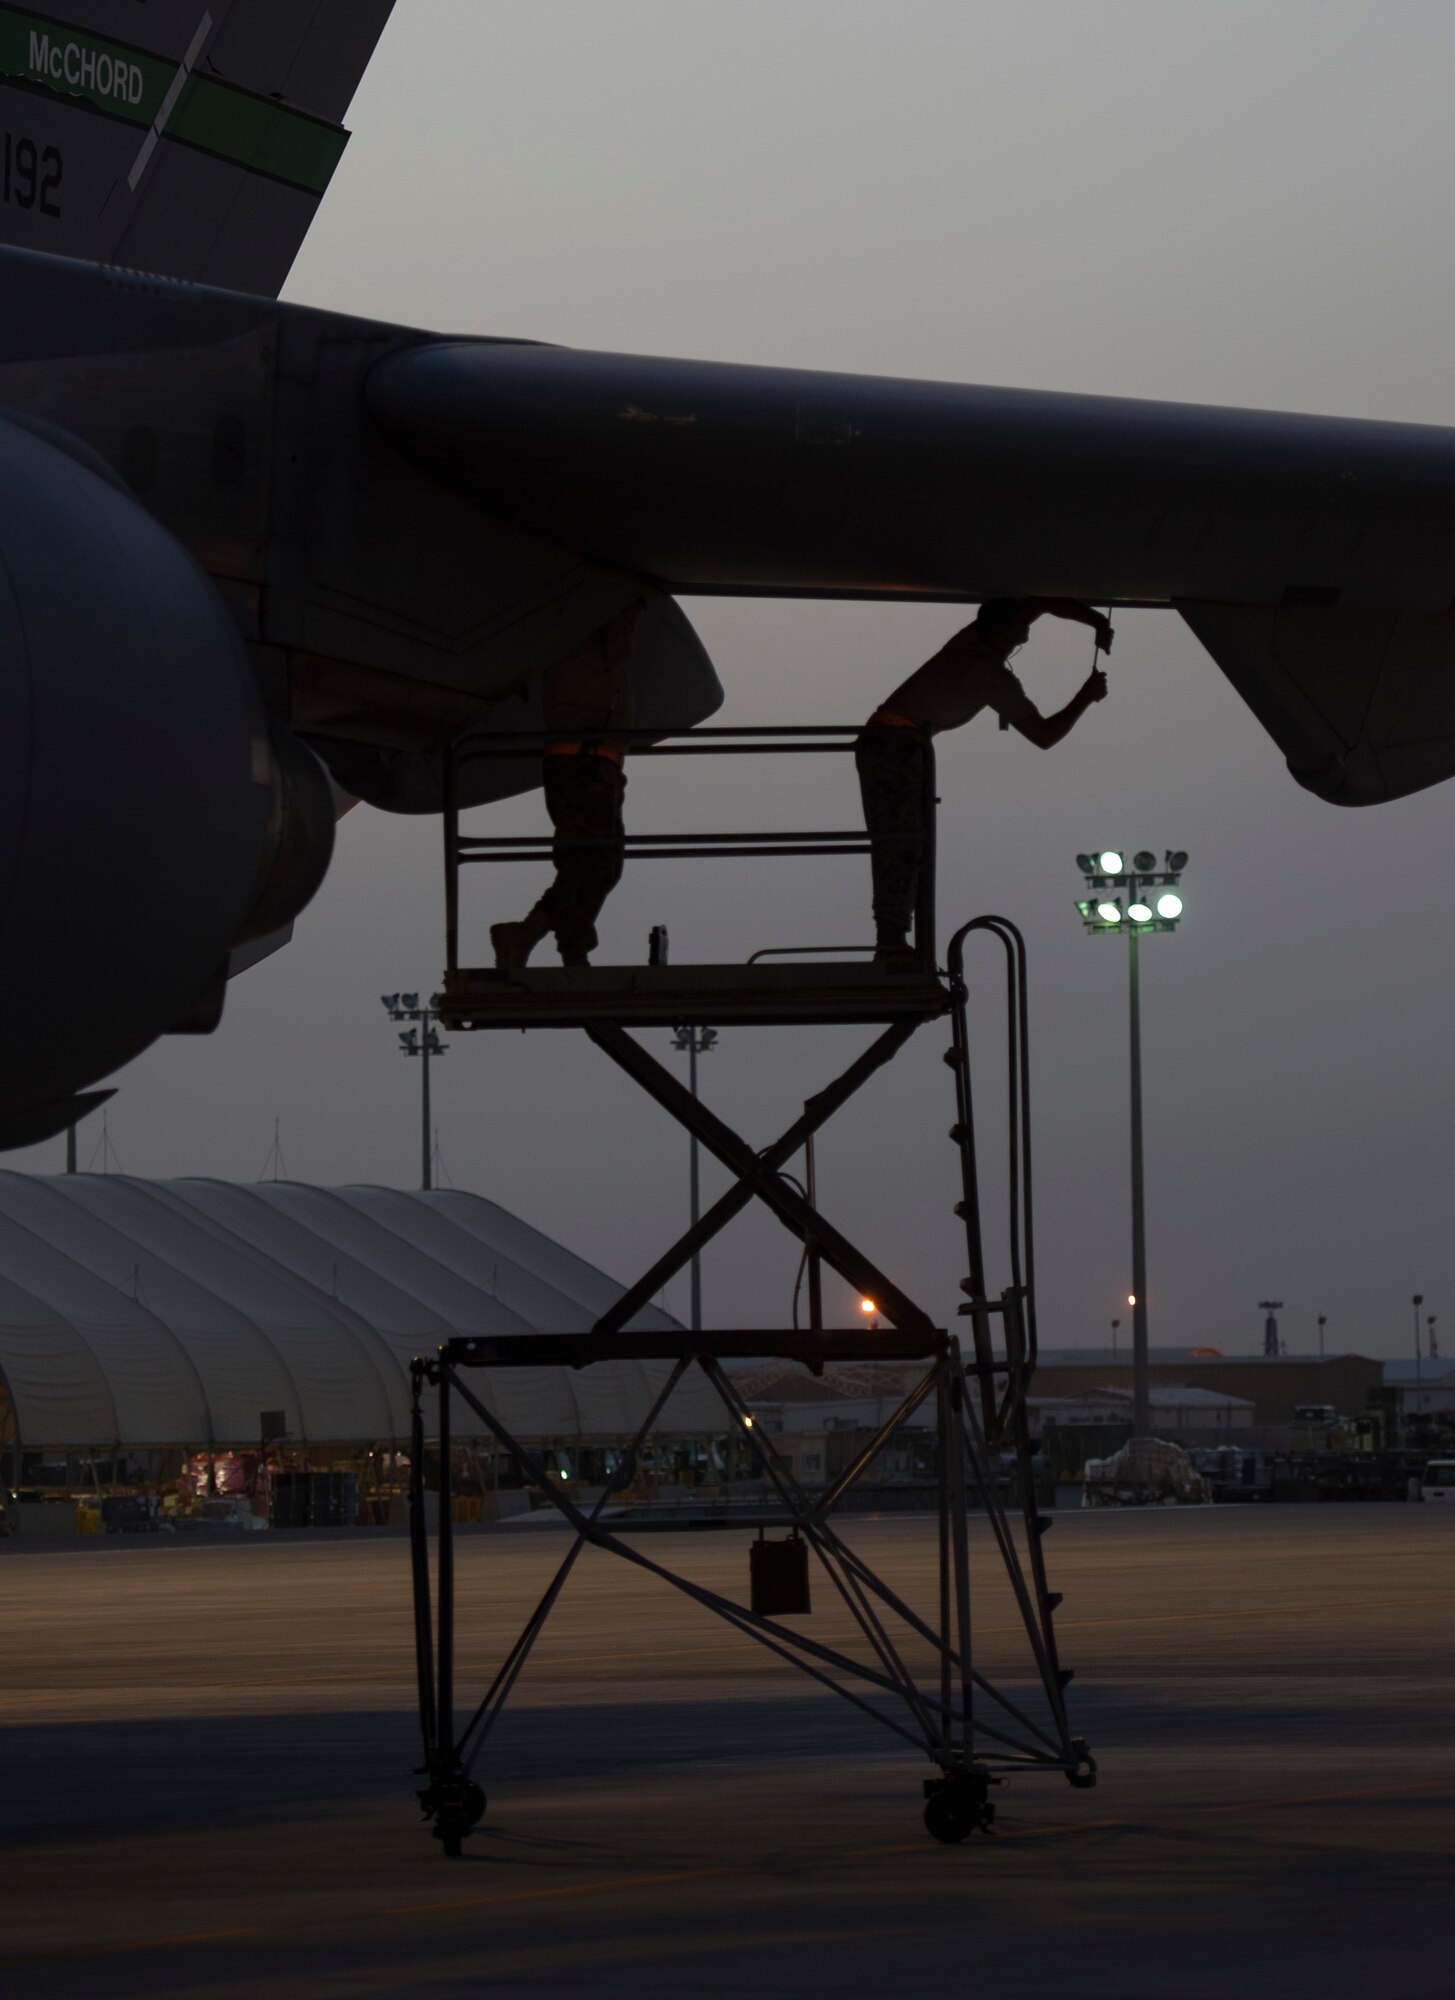 U.S. Air Force Airmen with the 379th Expeditionary Maintenance Squadron perform a post-flight inspection on a C-17 Globemaster III at Al Udeid Air Base, Qatar, May 4, 2017. The inspection being performed on the C-17 Globemaster III is accomplished on a regular schedule in order keep the aircraft mission ready.  (U.S. Air Force photo by Tech. Sgt. Amy M. Lovgren)